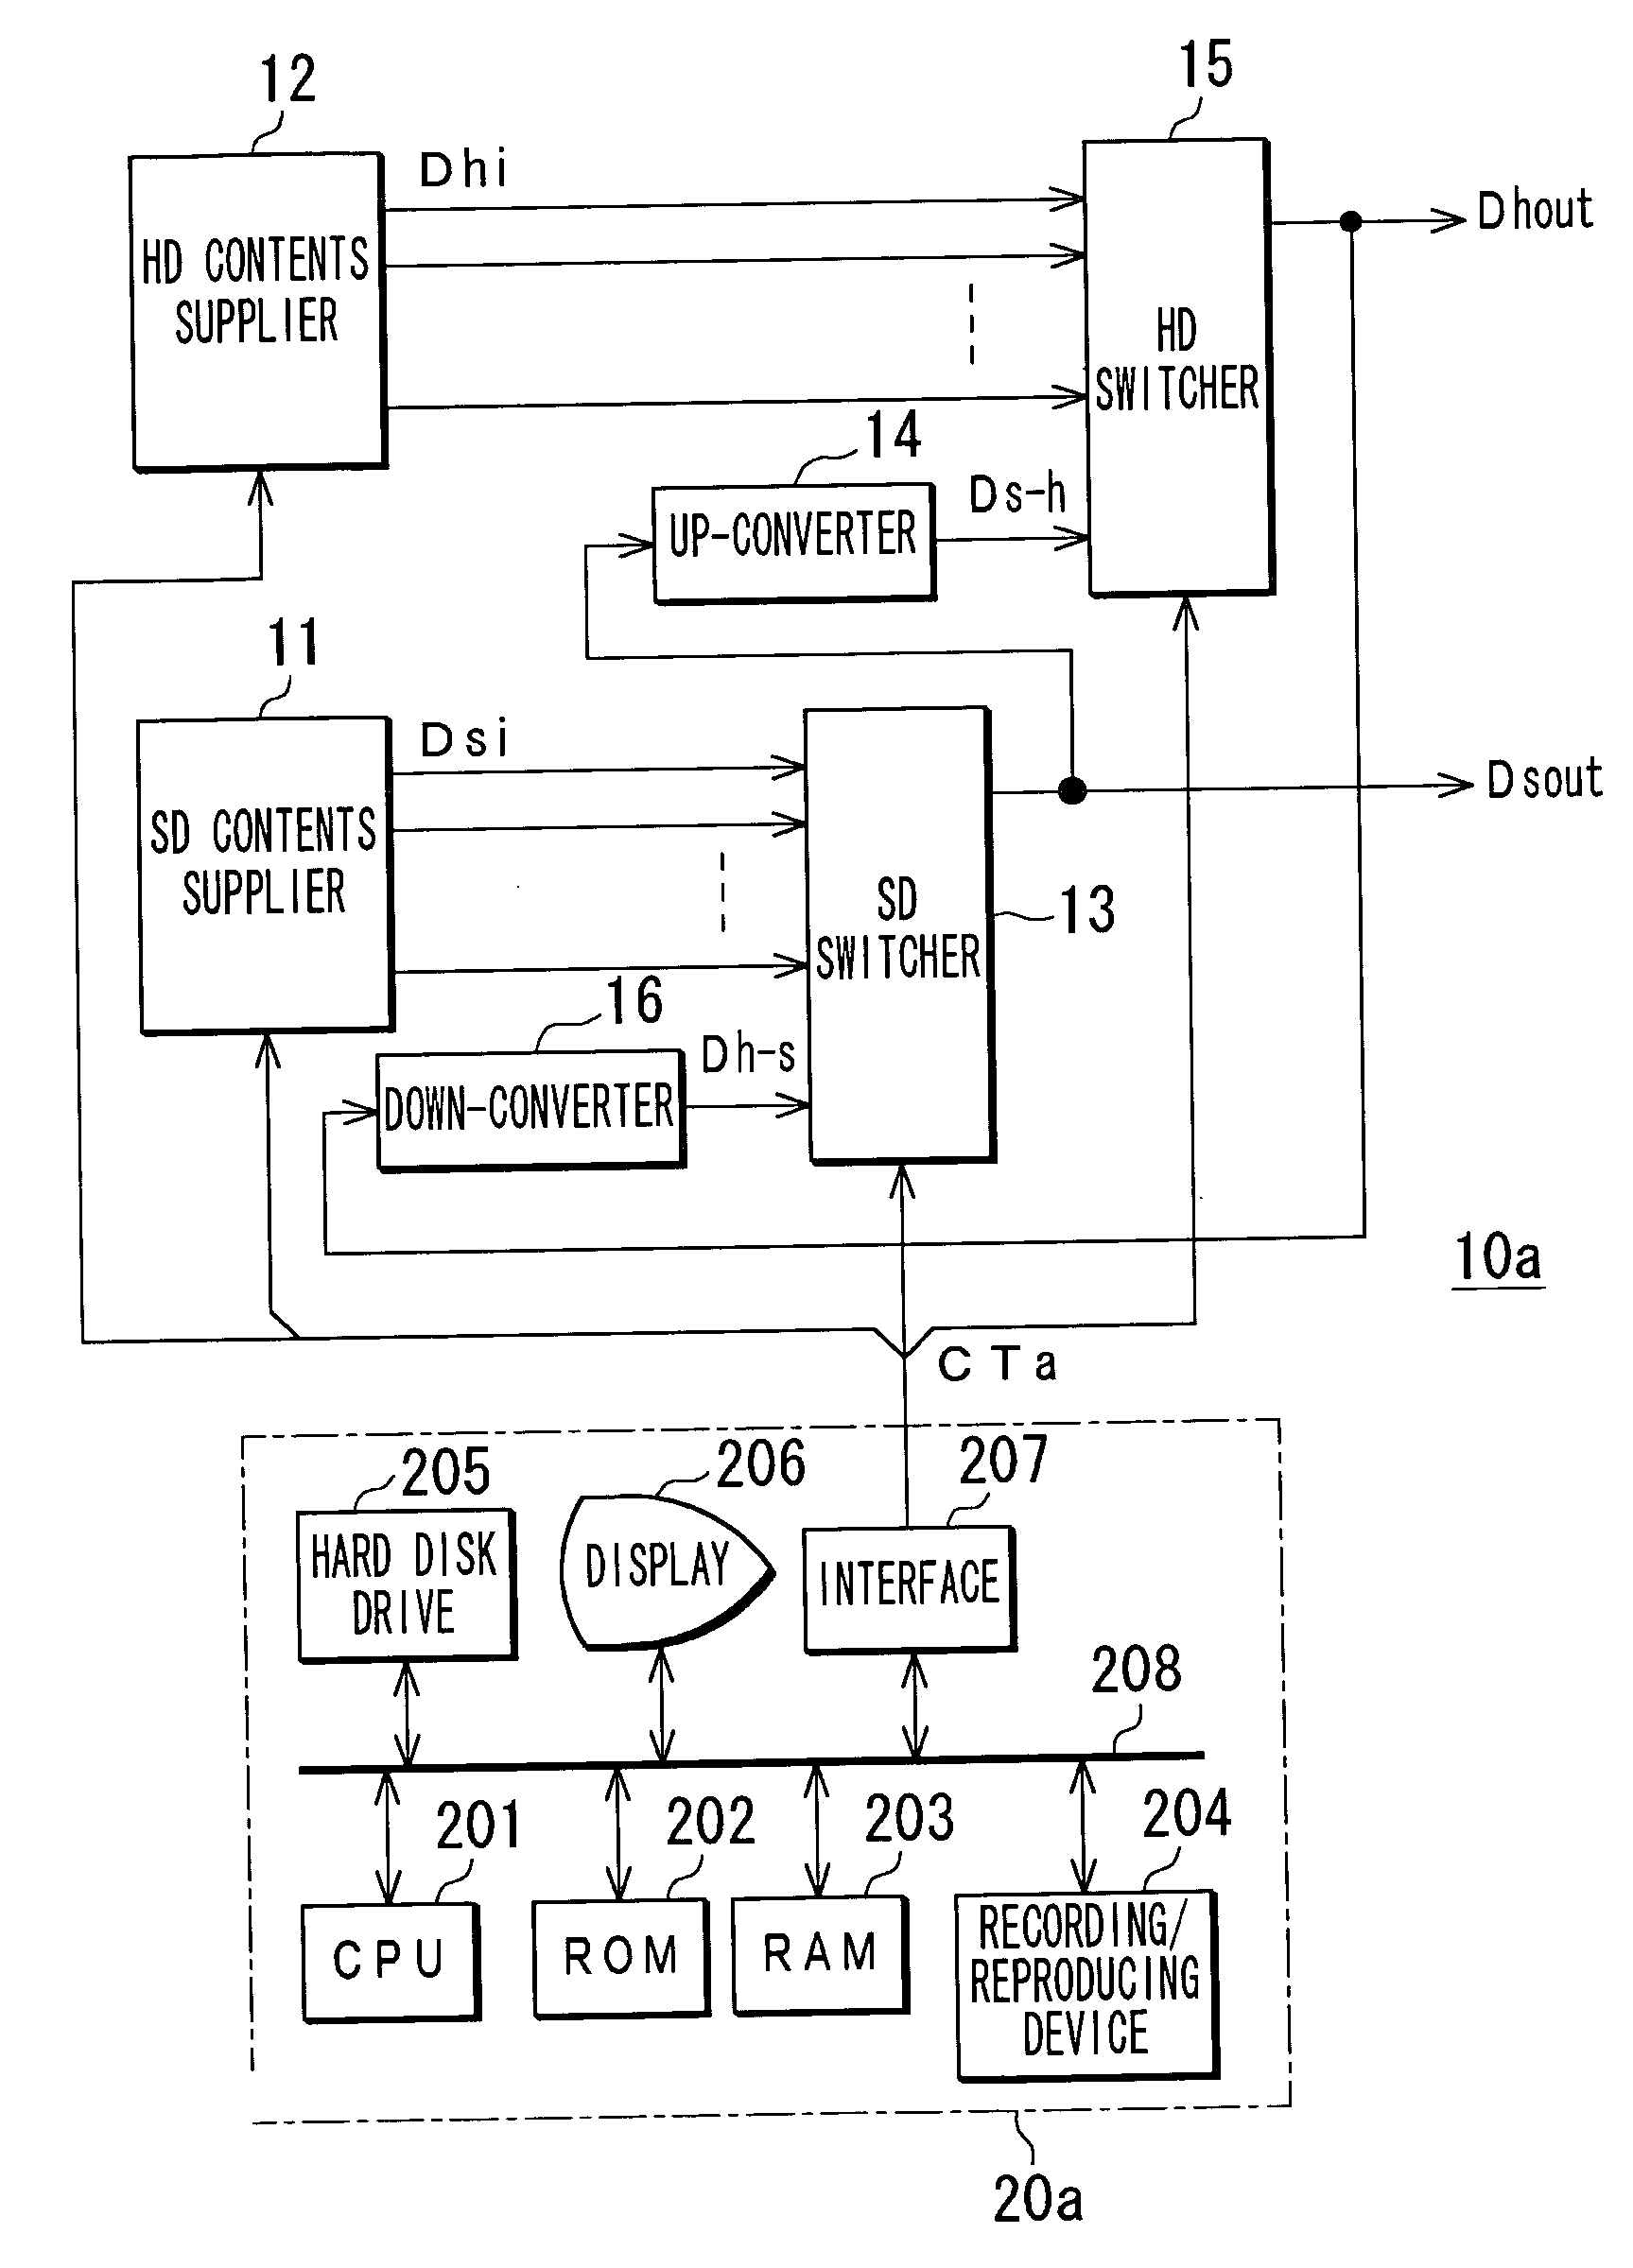 System for delivering contents automatically